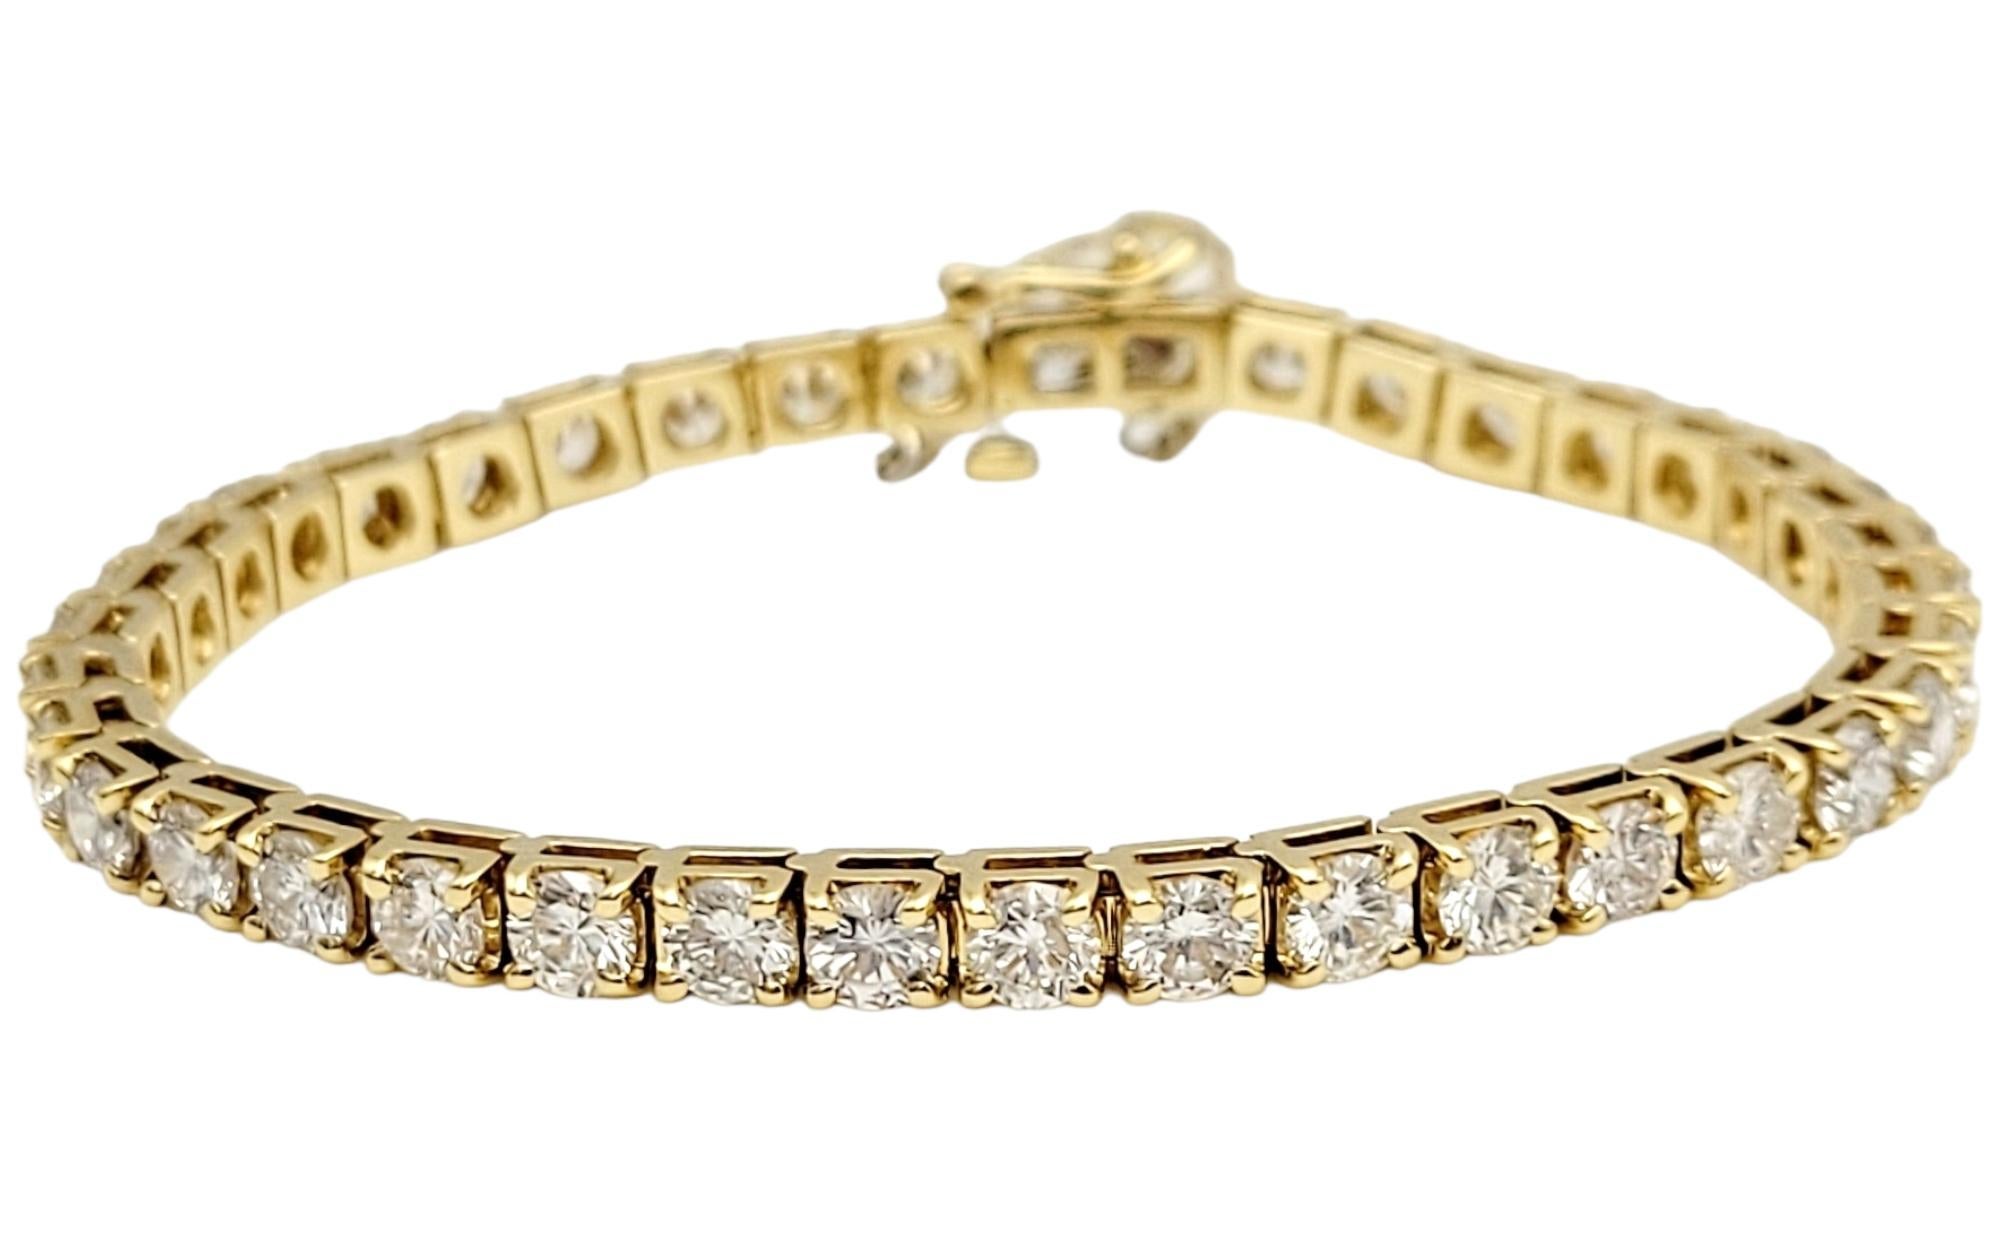 Introducing an exquisite 10-carat round brilliant cut diamond tennis bracelet, elegantly crafted in lustrous 18-karat yellow gold. This captivating piece showcases a mesmerizing array of 39 round brilliant cut diamonds weighing 10 carats. With a